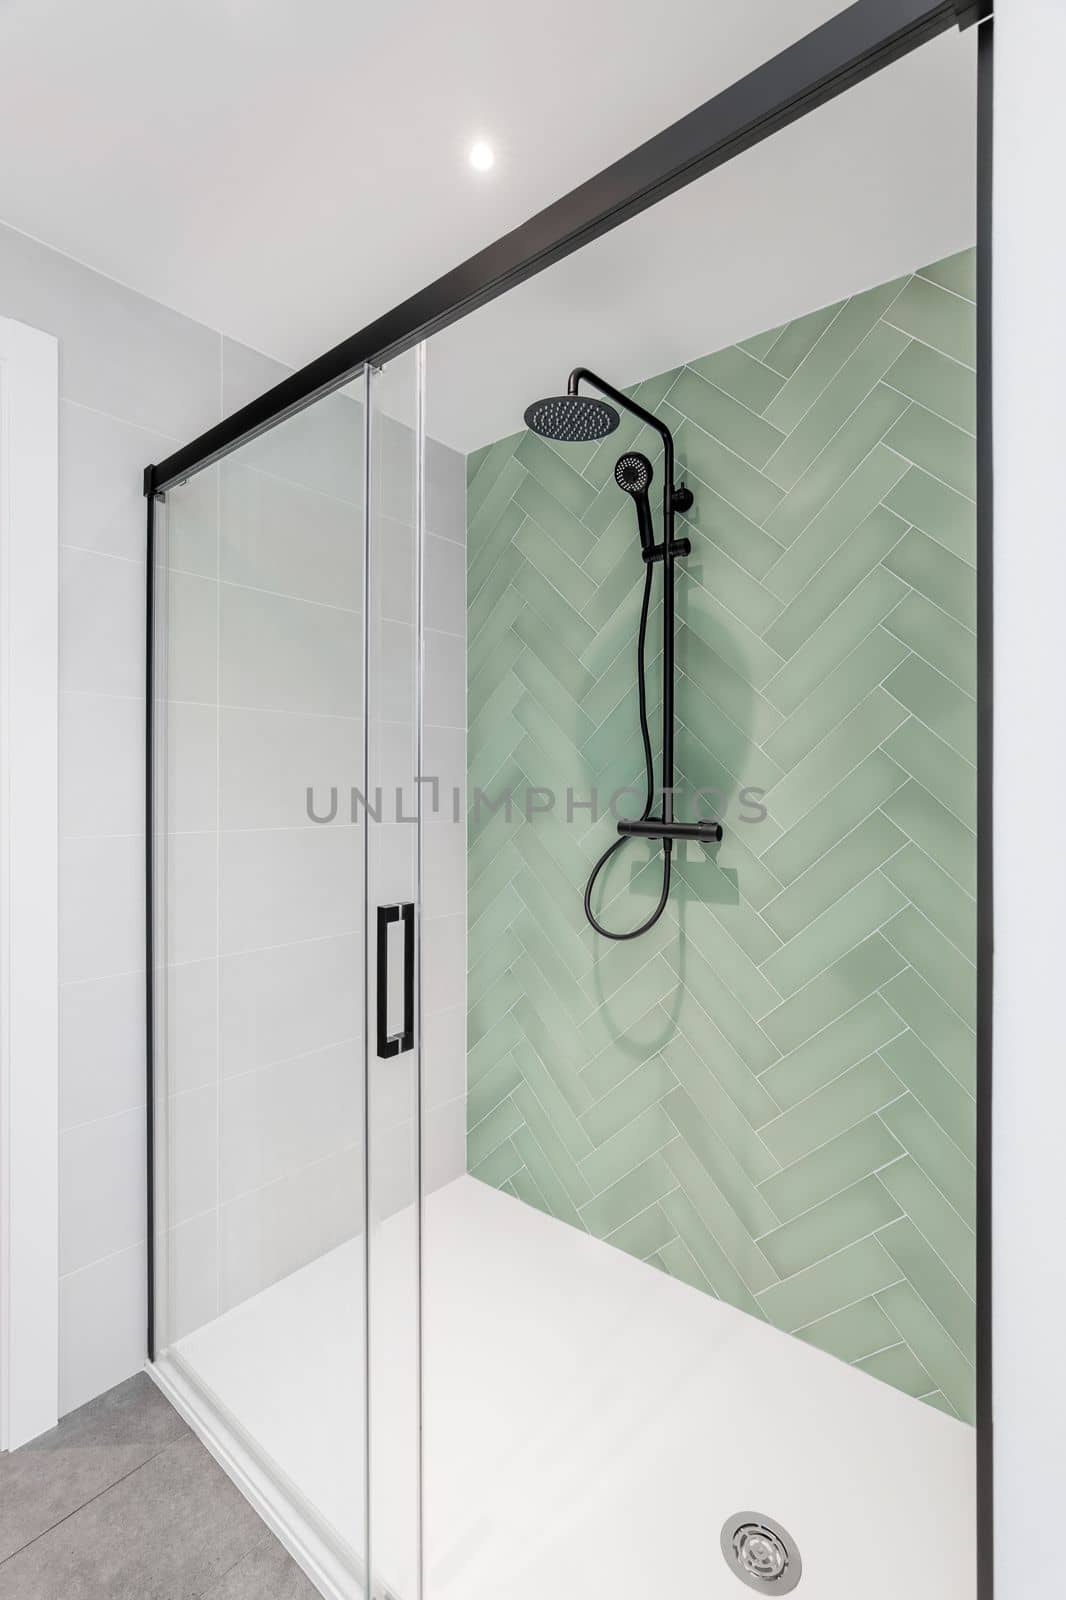 Modern bathroom with light green and white tiles, rain head, hand held shower and glass door